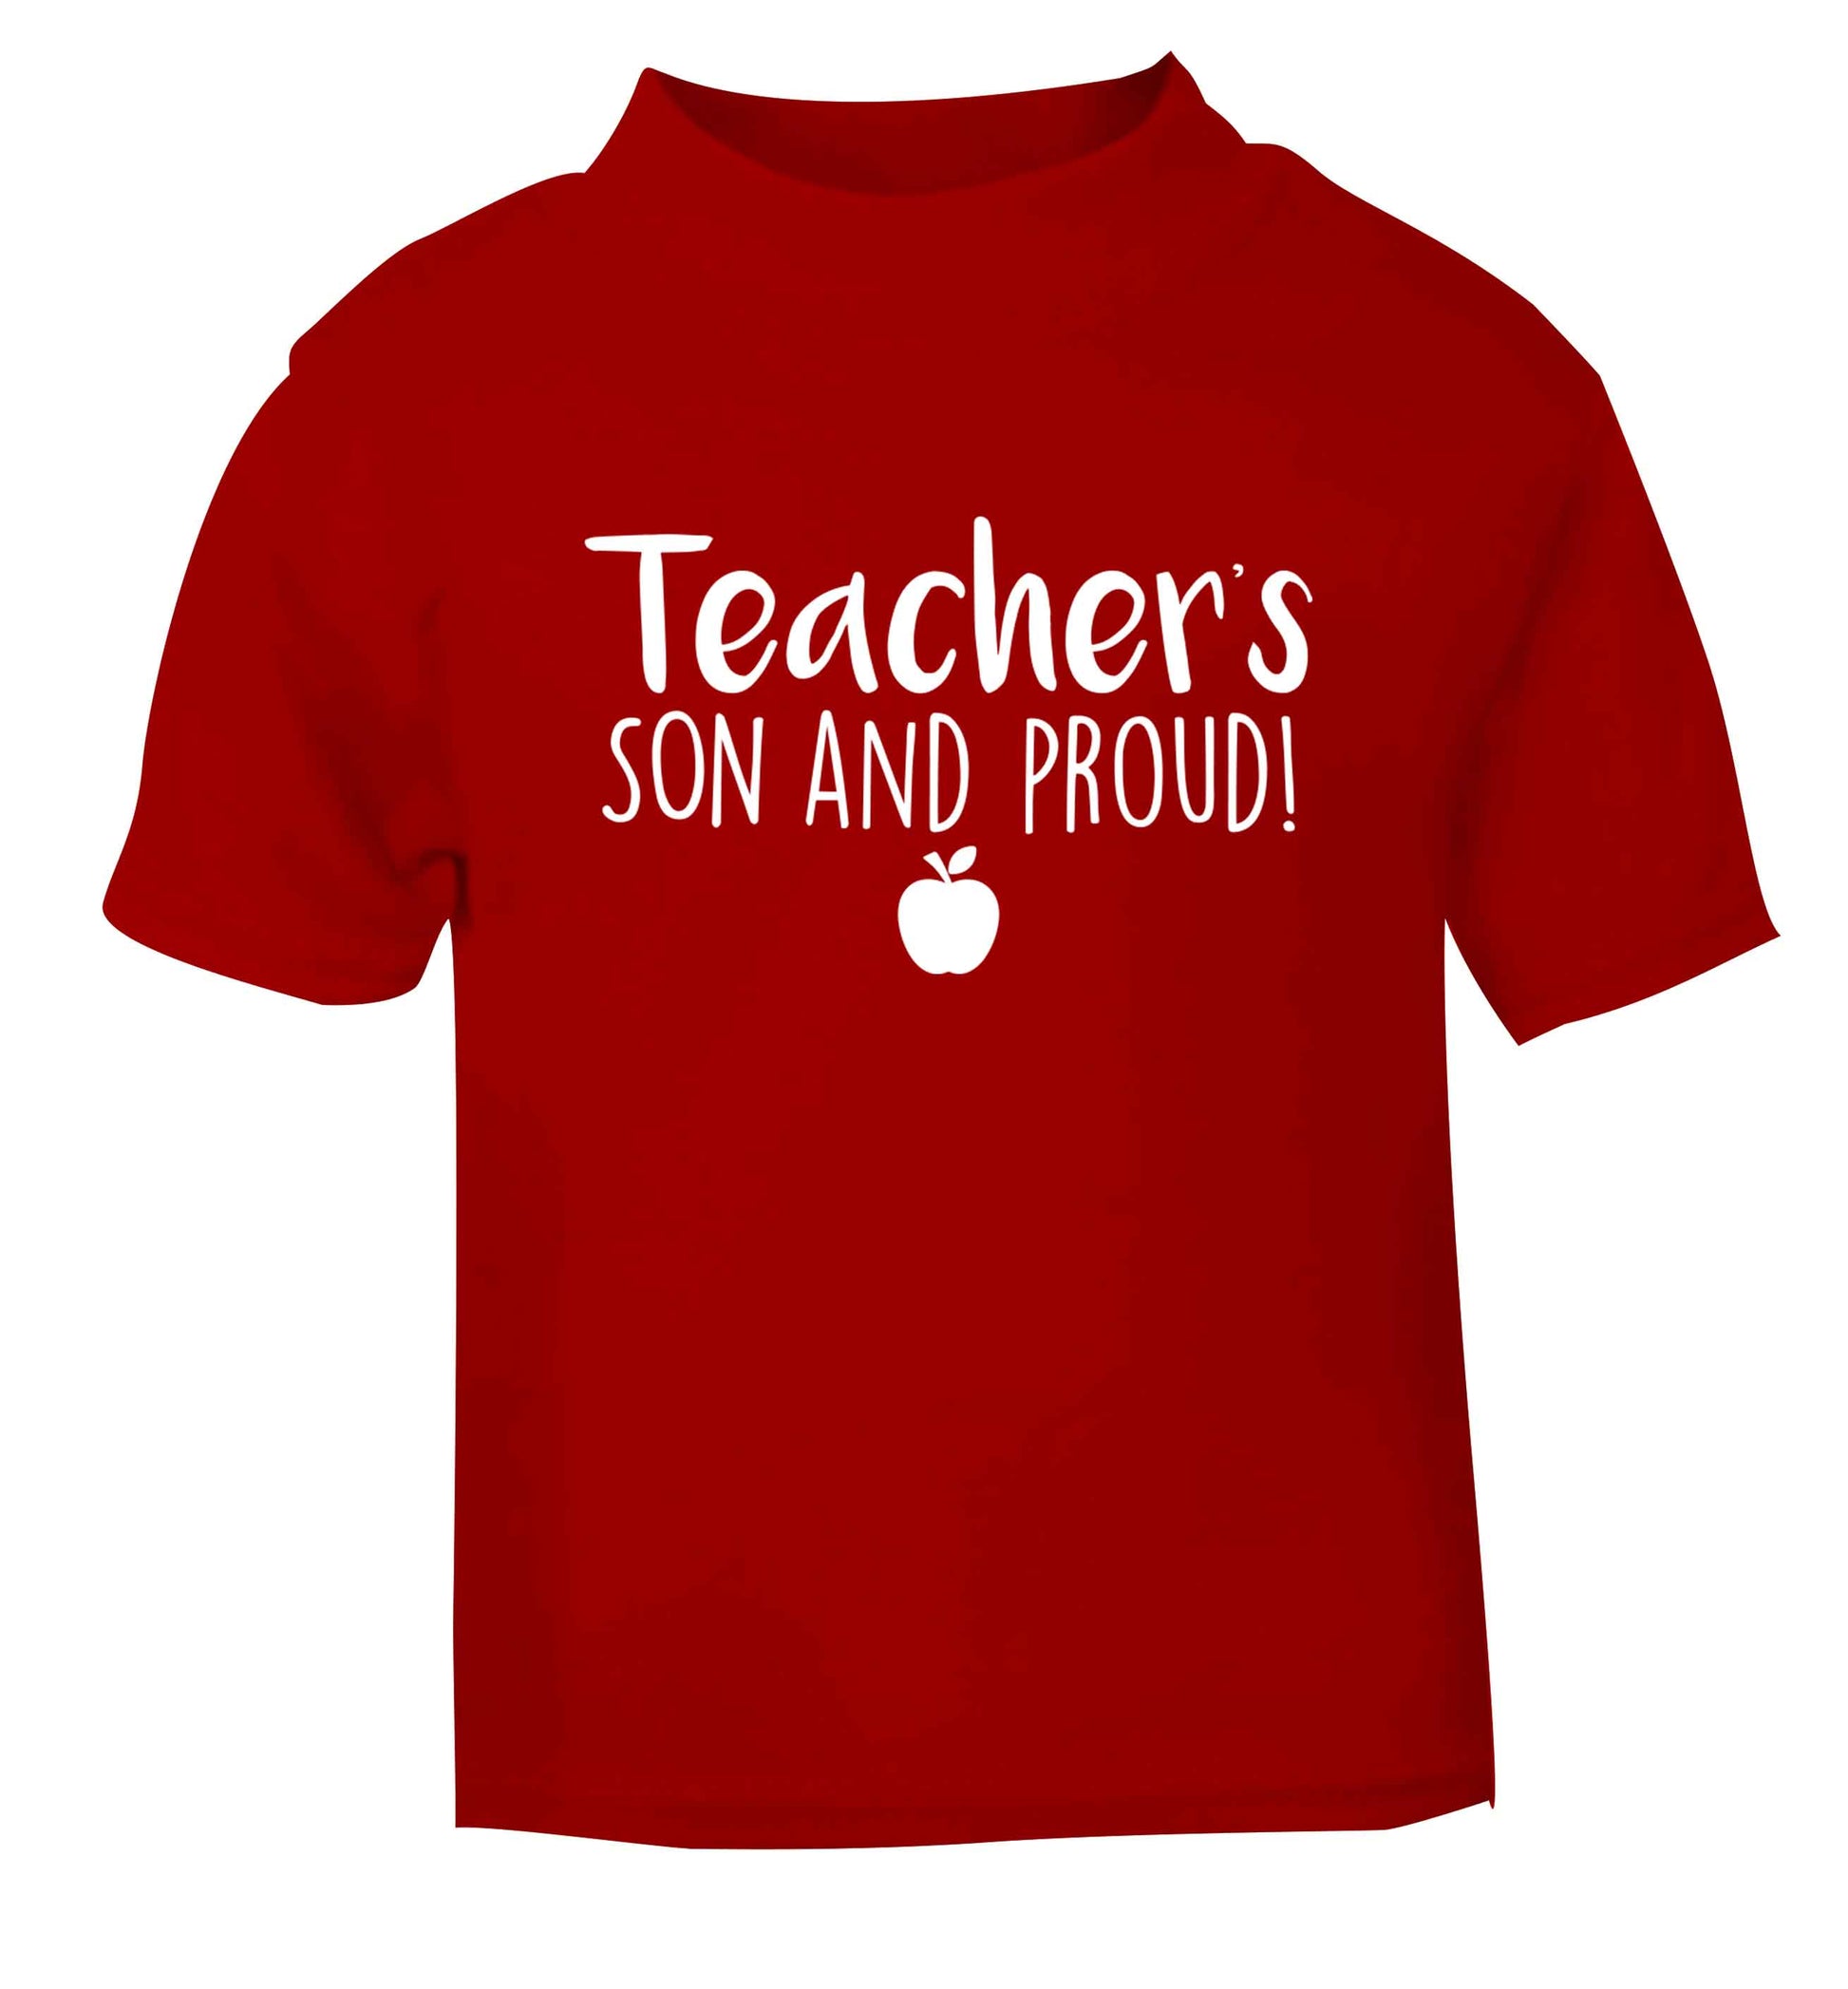 Teachers son and proud red baby toddler Tshirt 2 Years